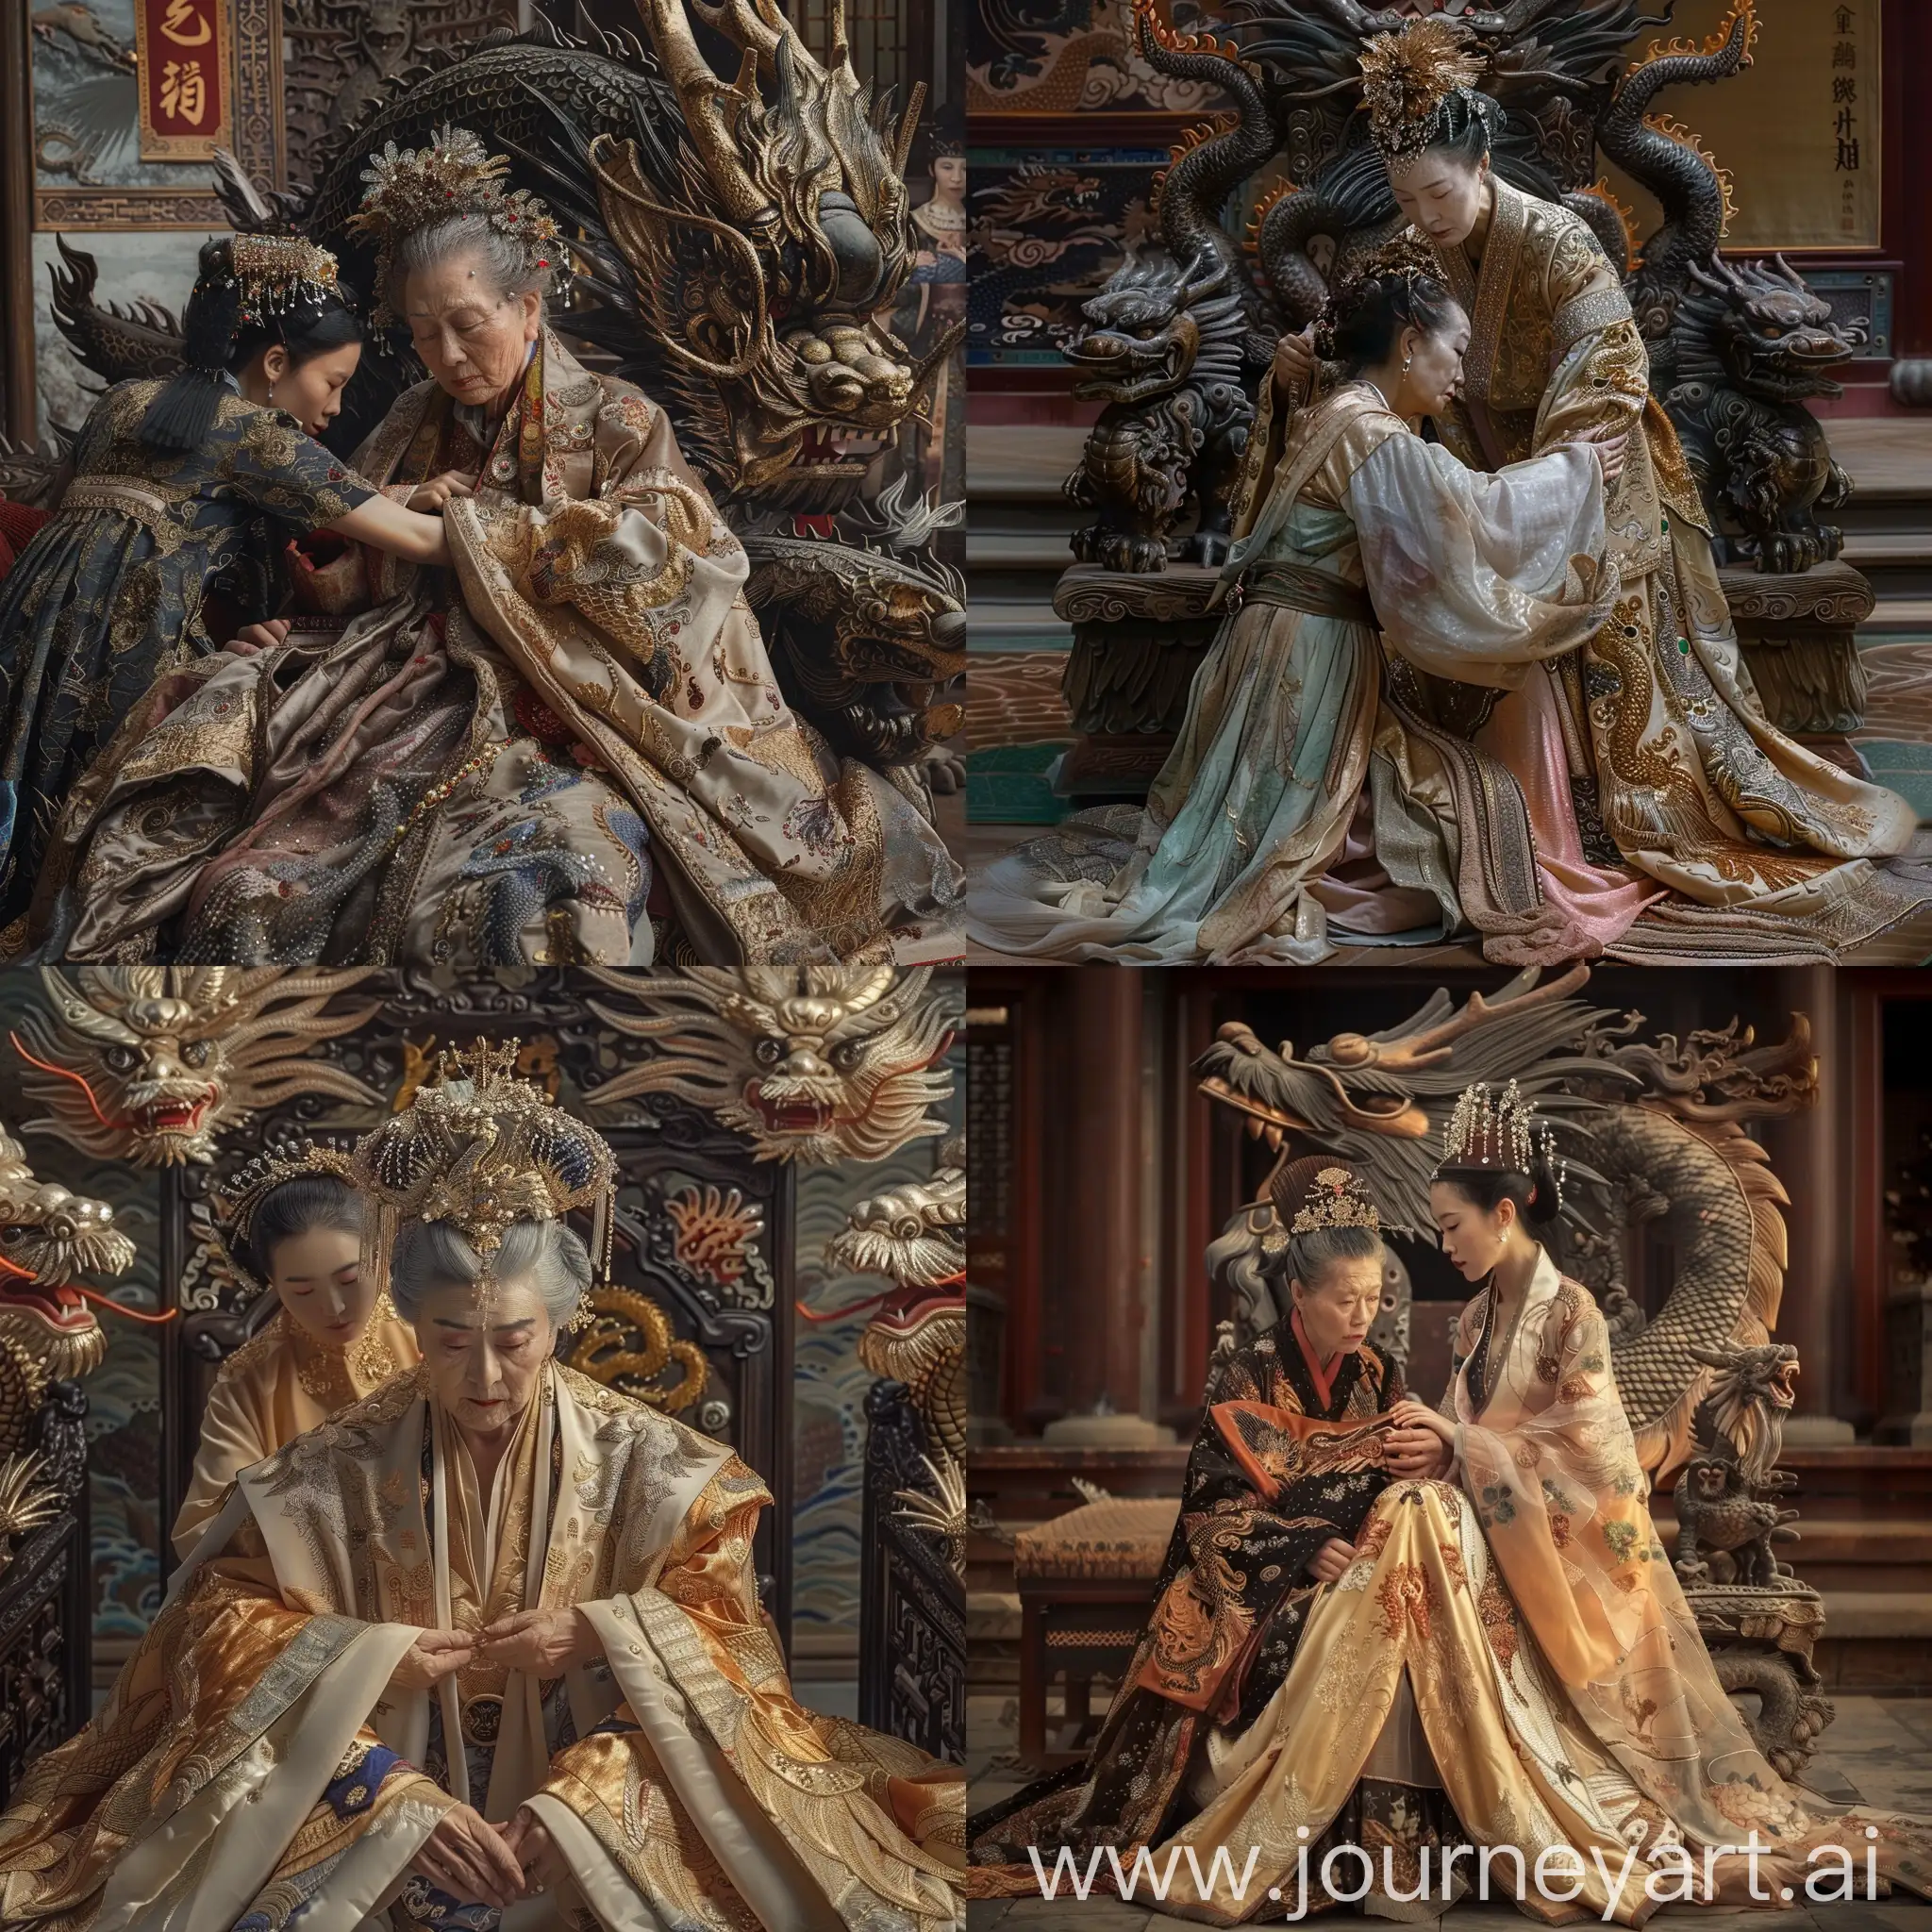 Elderly-Empress-Wu-Zetian-Assisted-to-Throne-by-Maid-in-Opulent-Palace-Setting